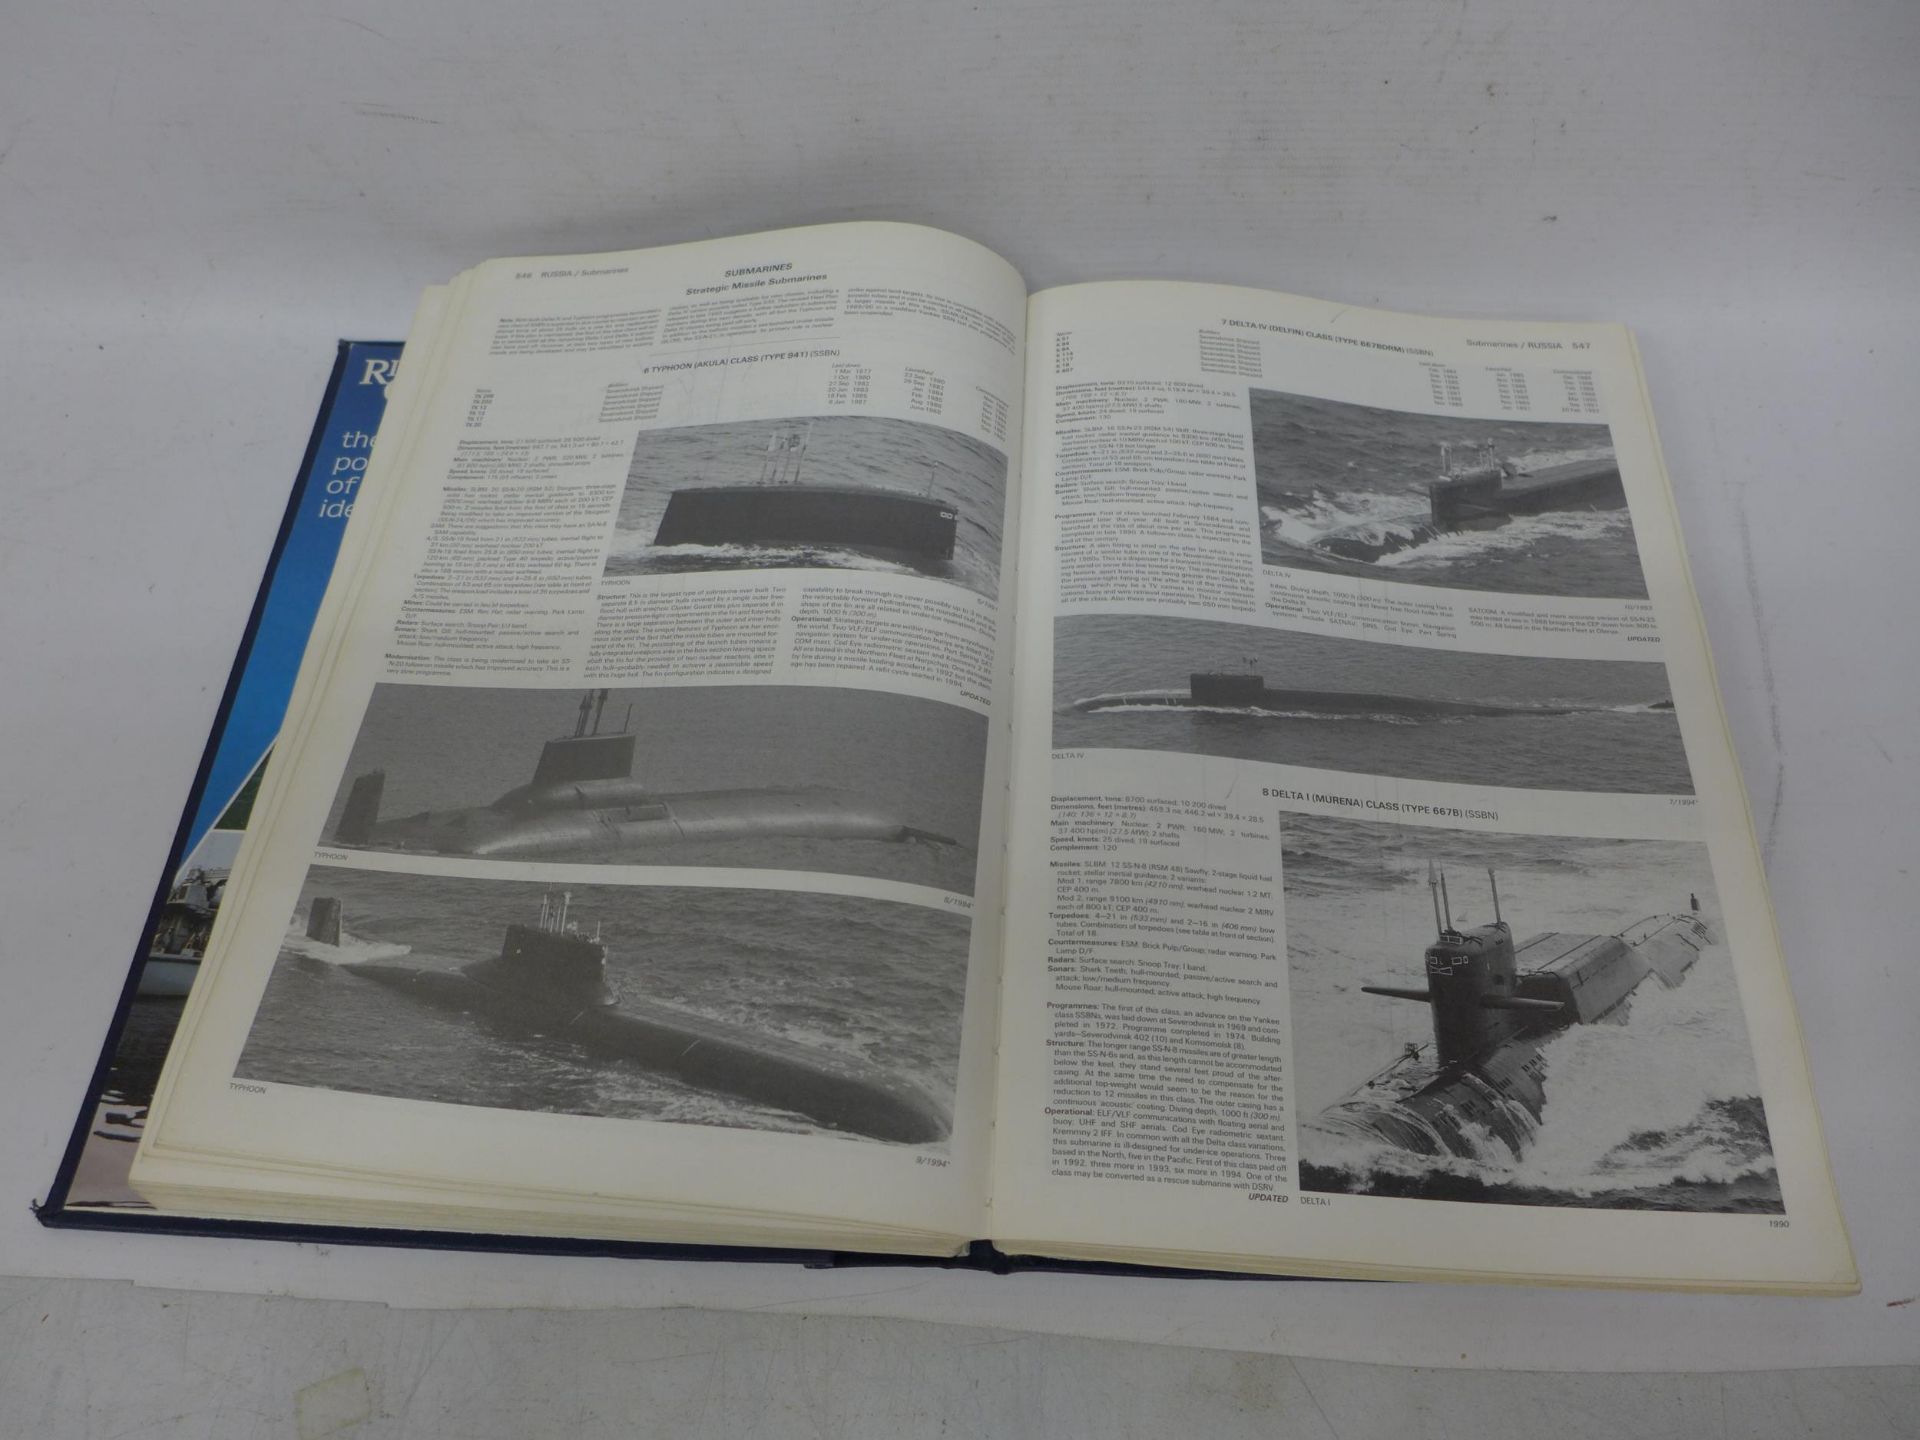 A COPY OF JANE'S FIGHTING SHIPS 1995-96 - Image 2 of 2